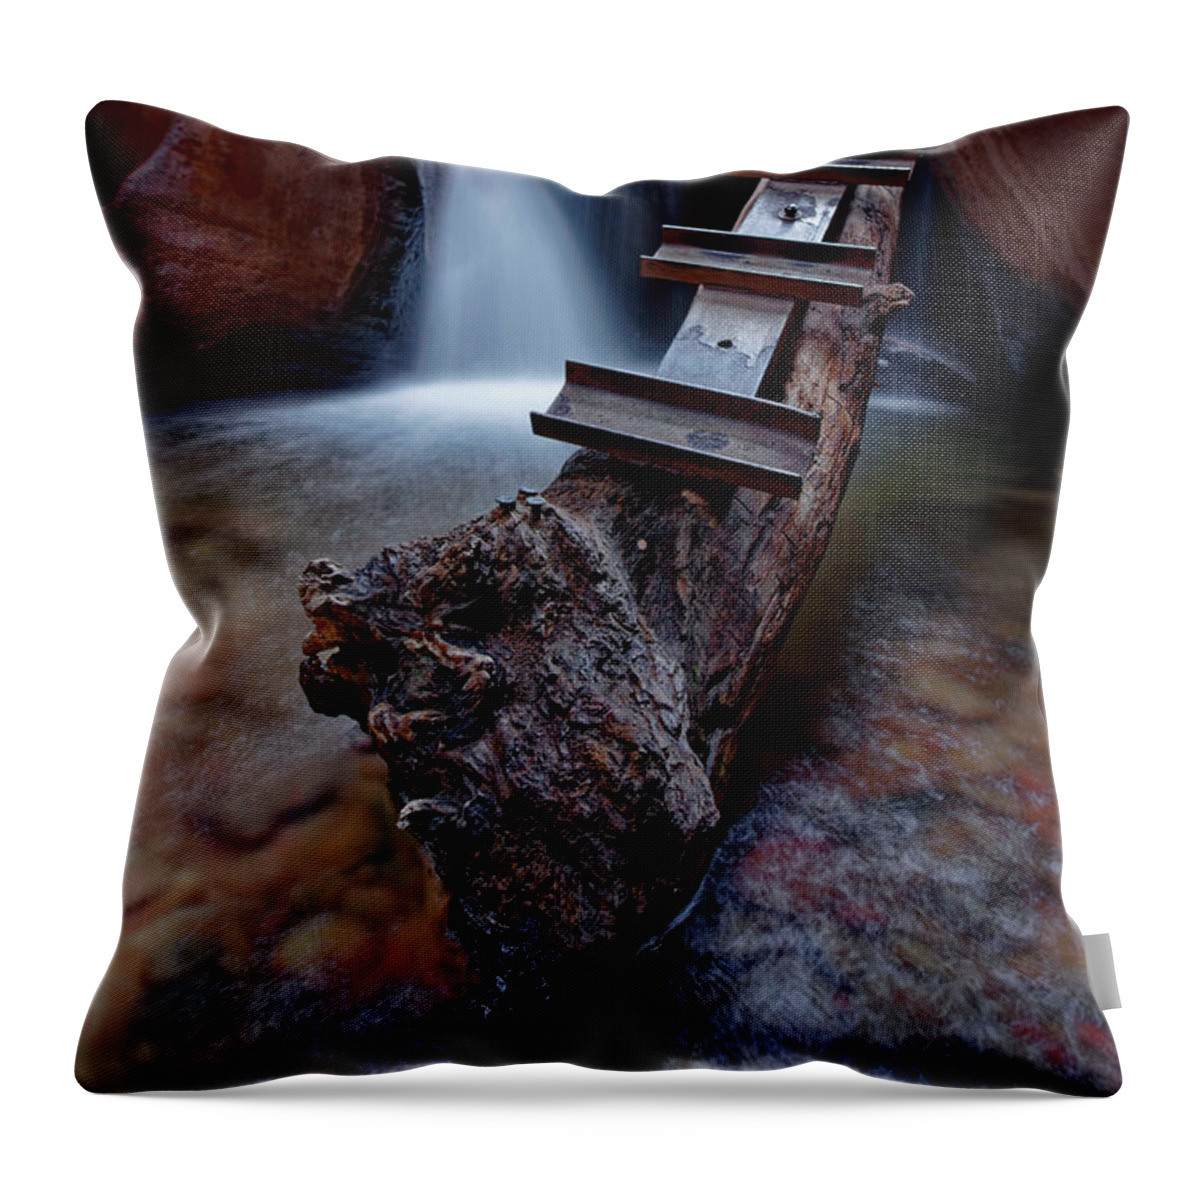 Waterfall Throw Pillow featuring the photograph Slippery When Wet by Jonathan Davison